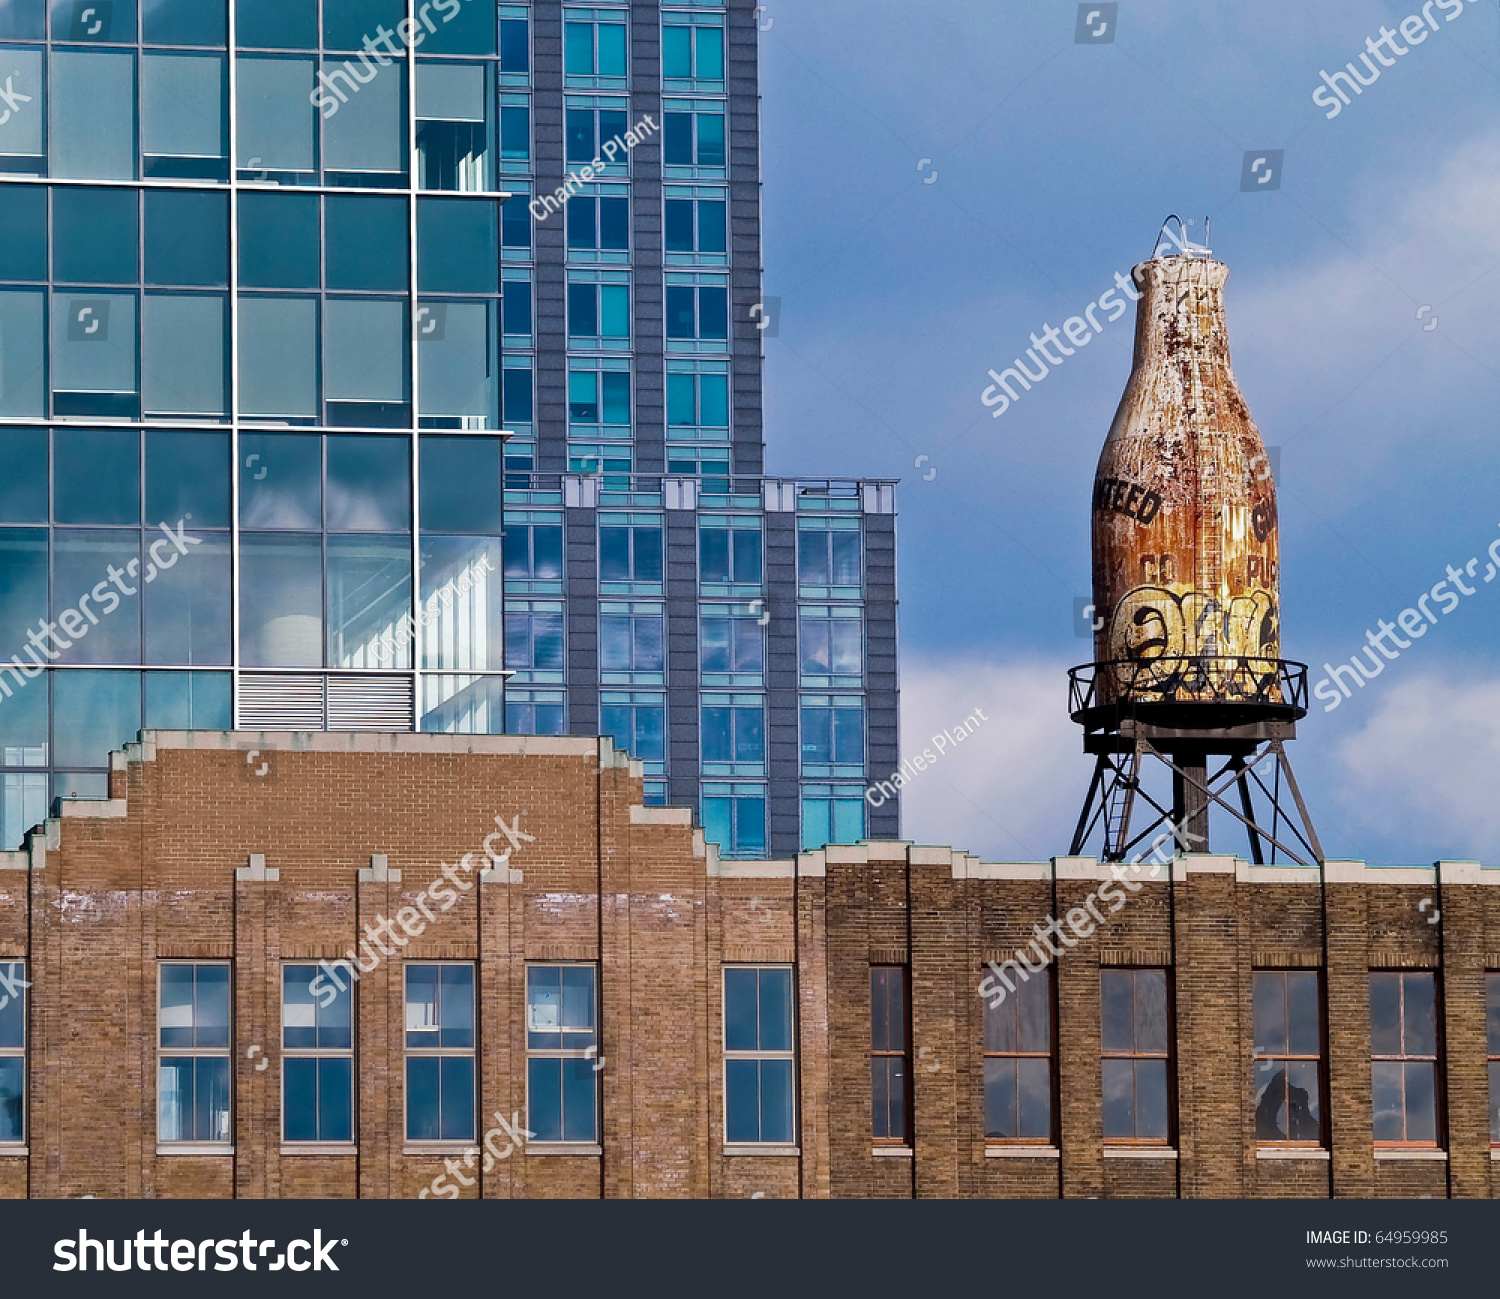 City Scape Three Buildings Different Styles Stock Photo (100% Legal ...